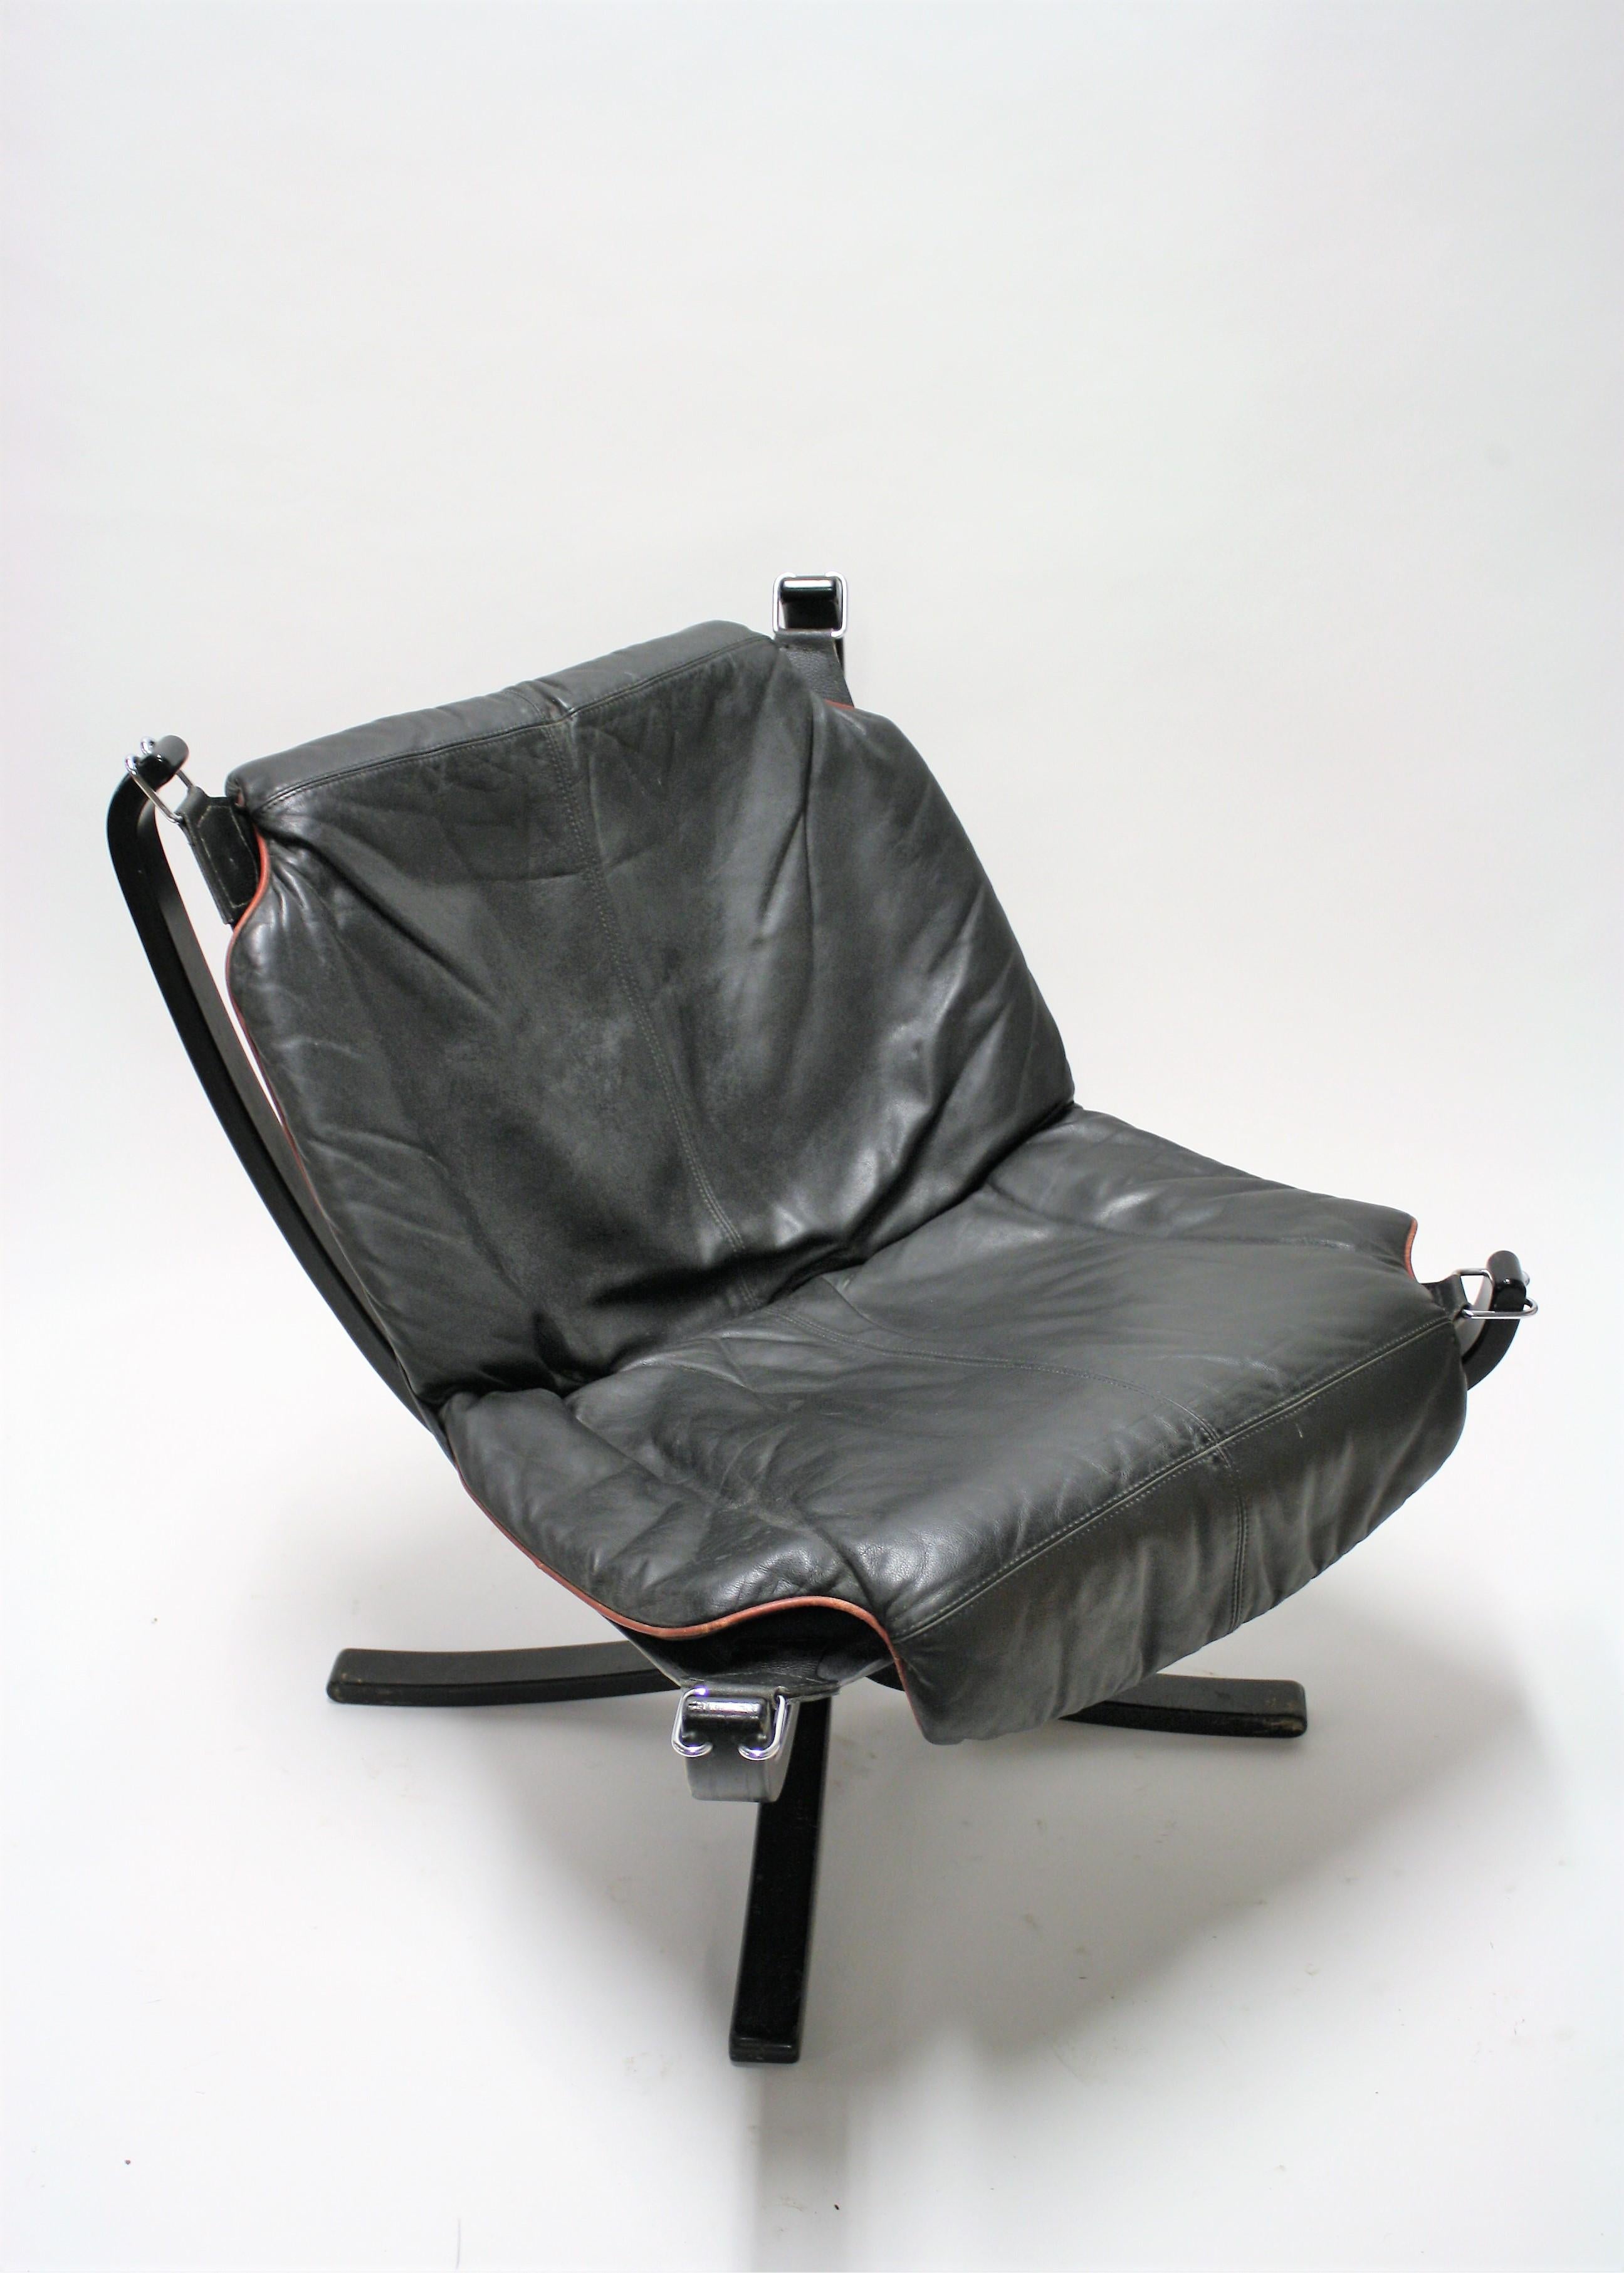 Mid-Century Modern lounge chair designed by Sigurd Ressel for Vatne Mobler.

The chair consists of a black wooden frame with black leather cushions. The cushions have a red lining.

Beautiful original condition, minor wear on the leather, no